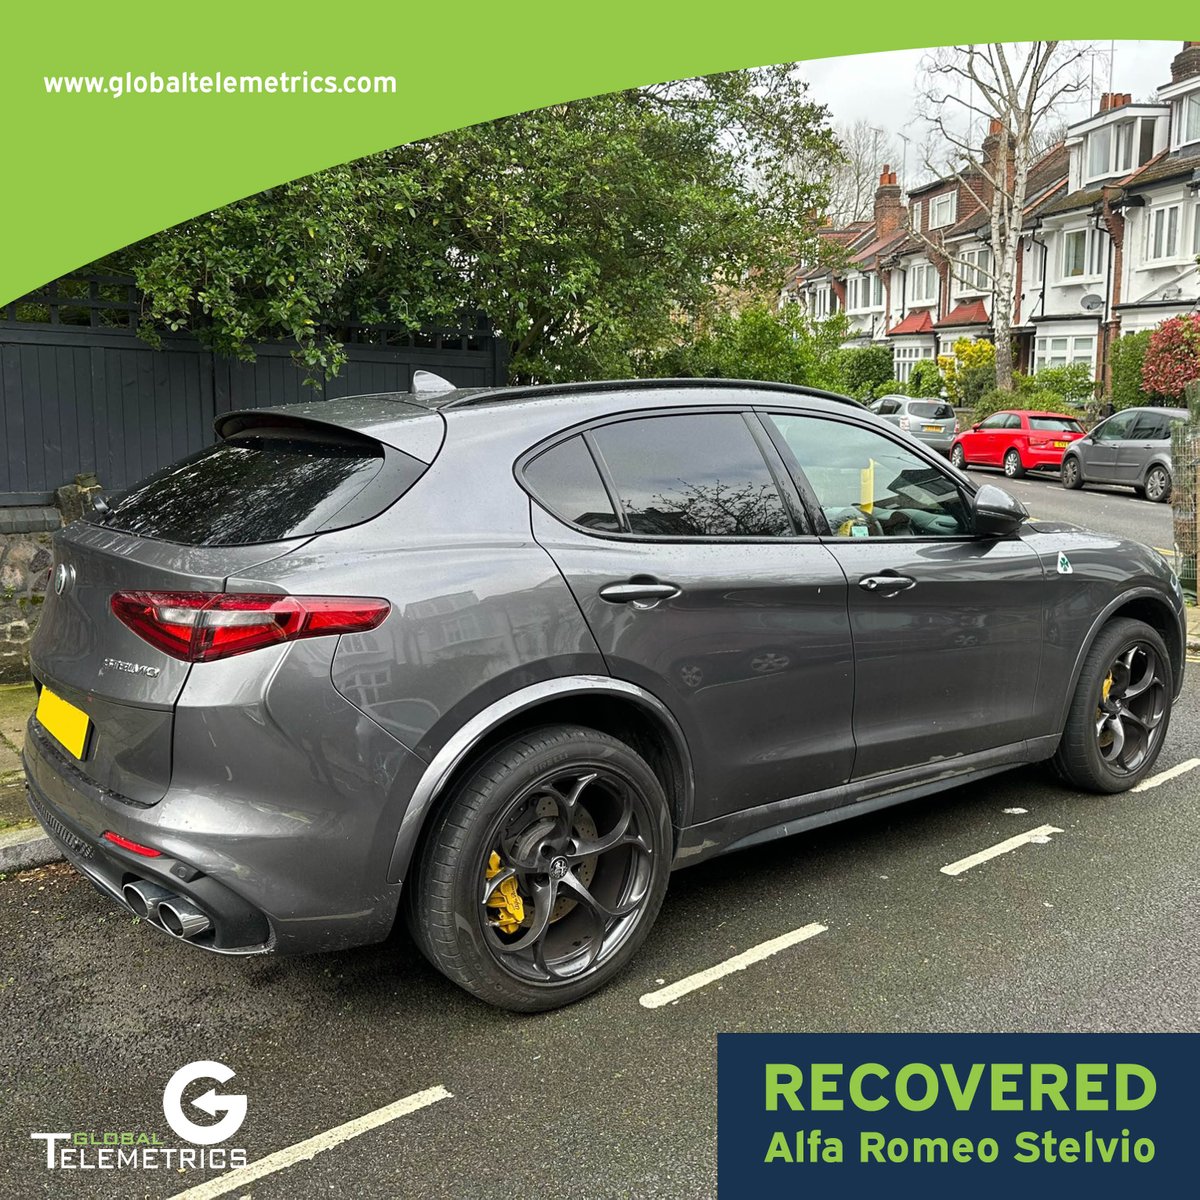 After only owning the vehicle for a short period of time, our customer knew #ItPaysToInvestInSecurity and thankfully had one of our tracking devices installed. Allowing for our Repatriations Team and the police to recover their vehicle yesterday after being stolen whilst they…